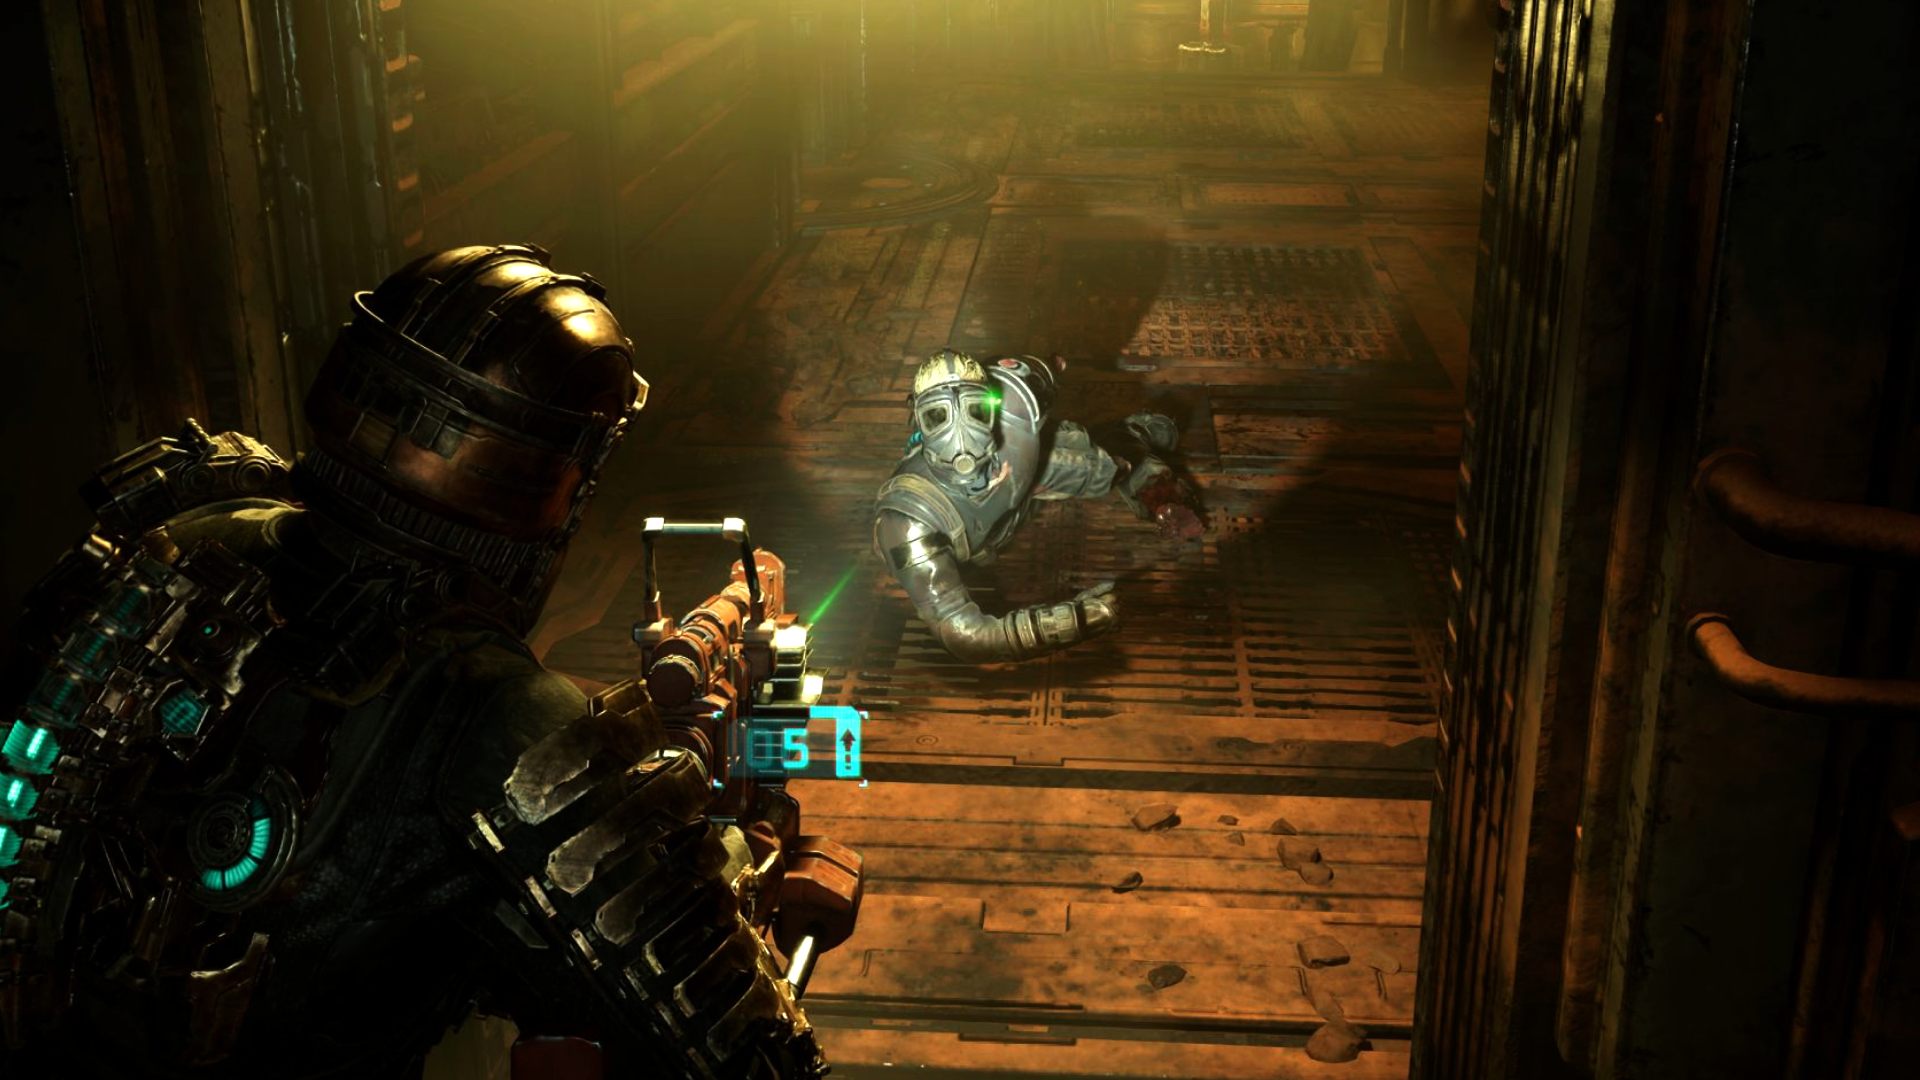 Best dead space setting: Isaac points his gun at a crawling soldier 